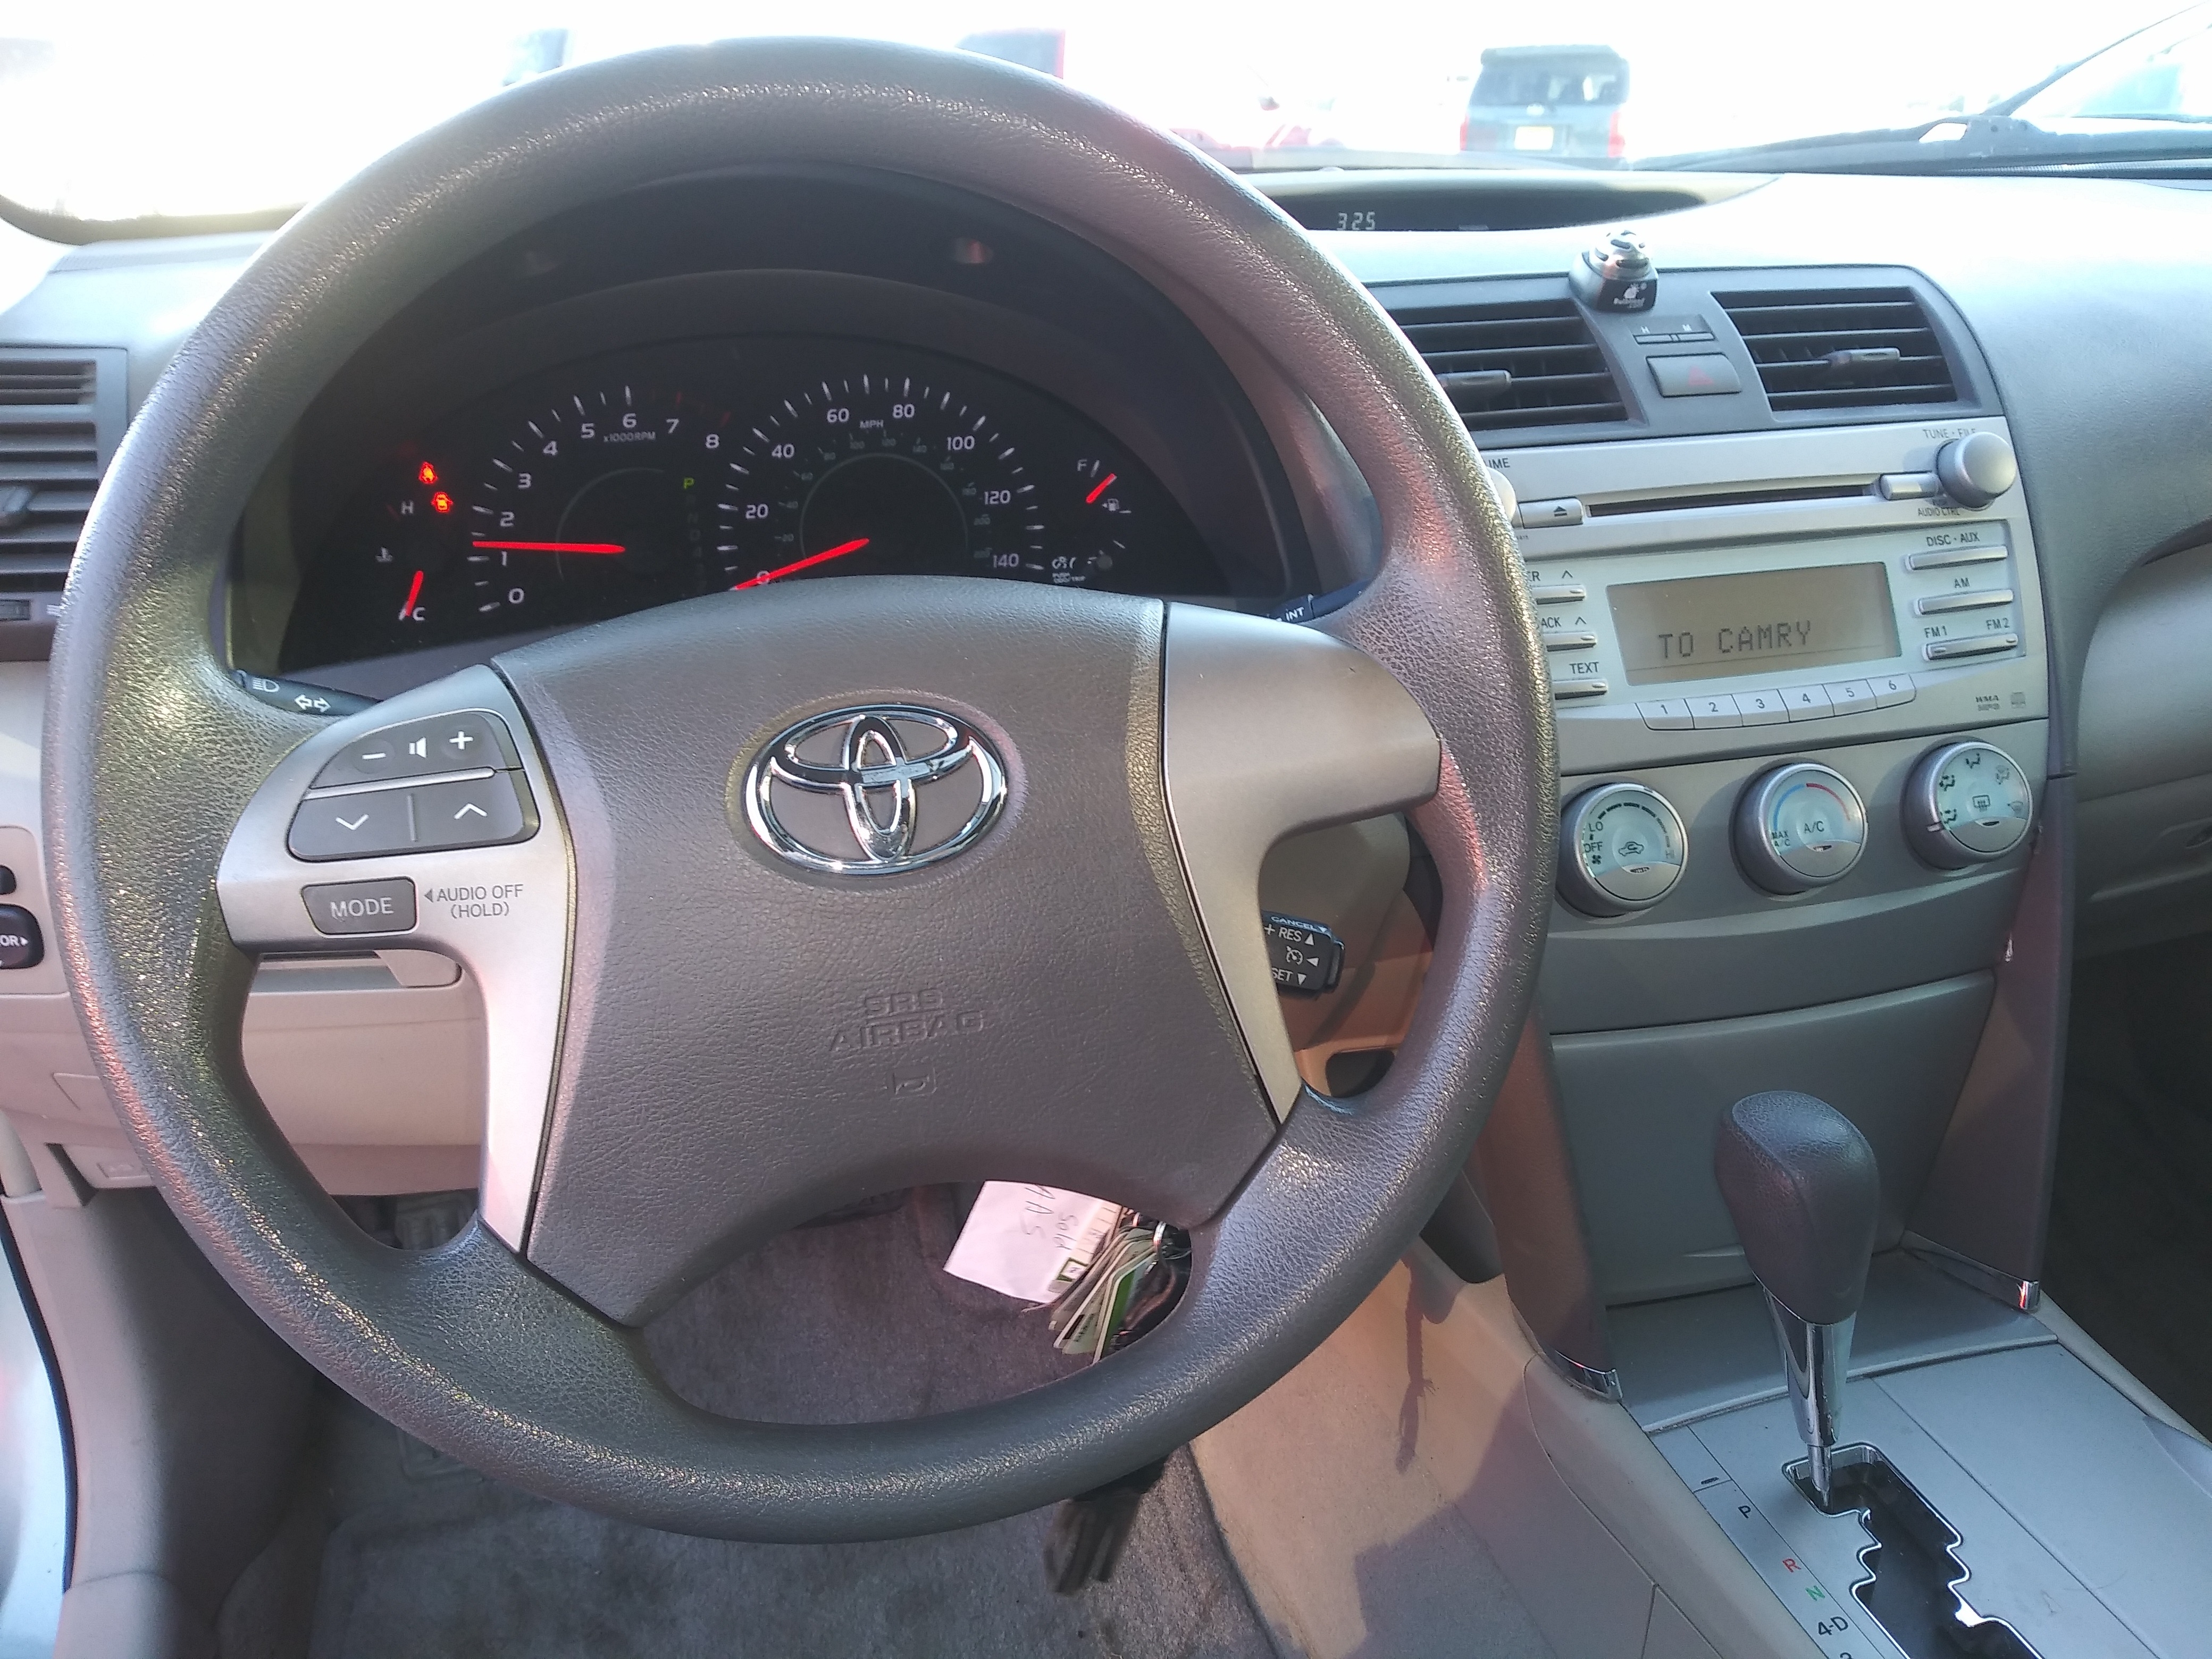 2007 Toyota Camry 4dr Sdn I4 Manual Ce